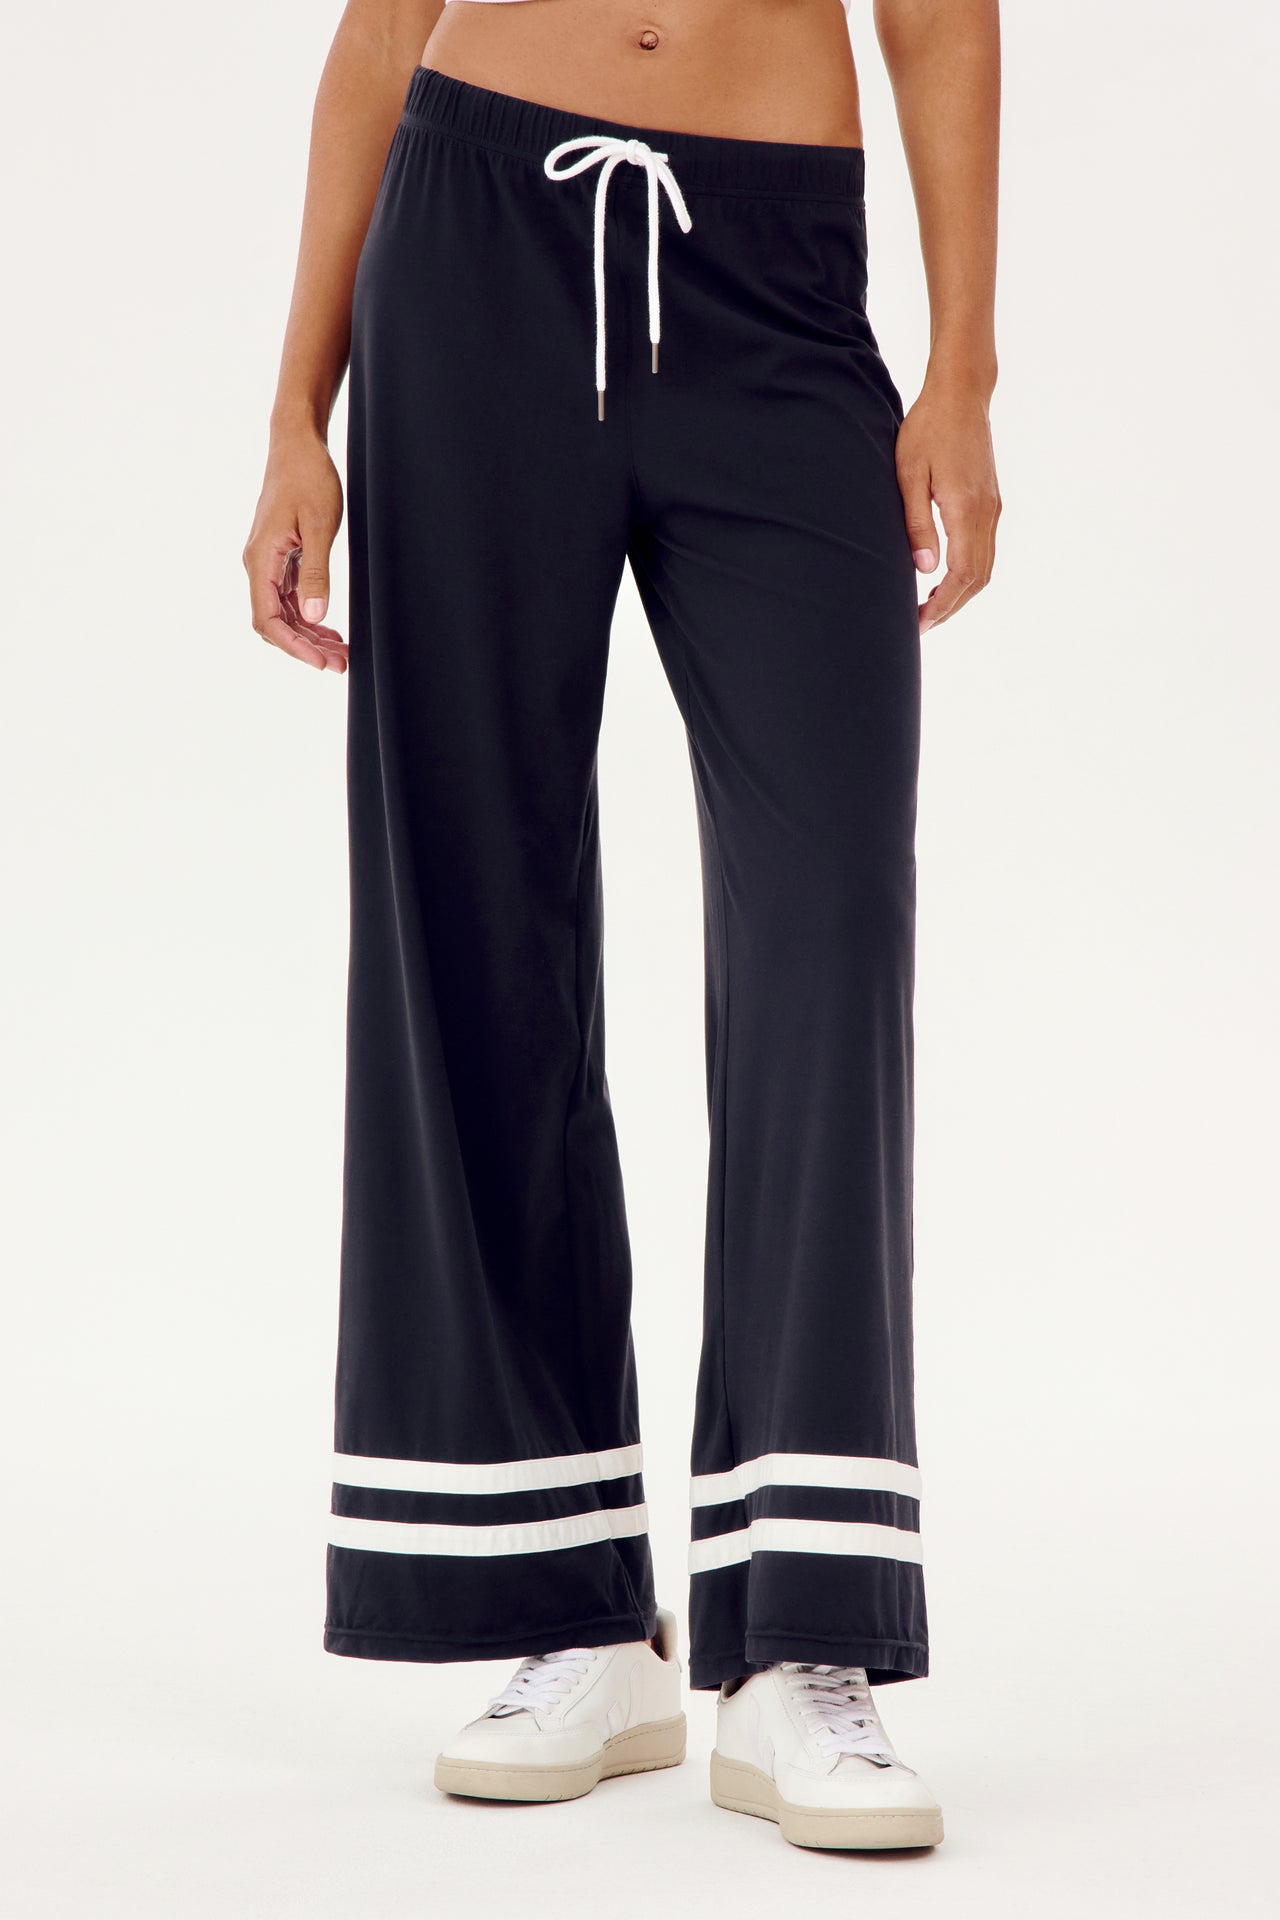 A woman wearing a comfortable black SPLITS59 Quinn Airweight Wide Leg Pant with white stripes designed for workouts.